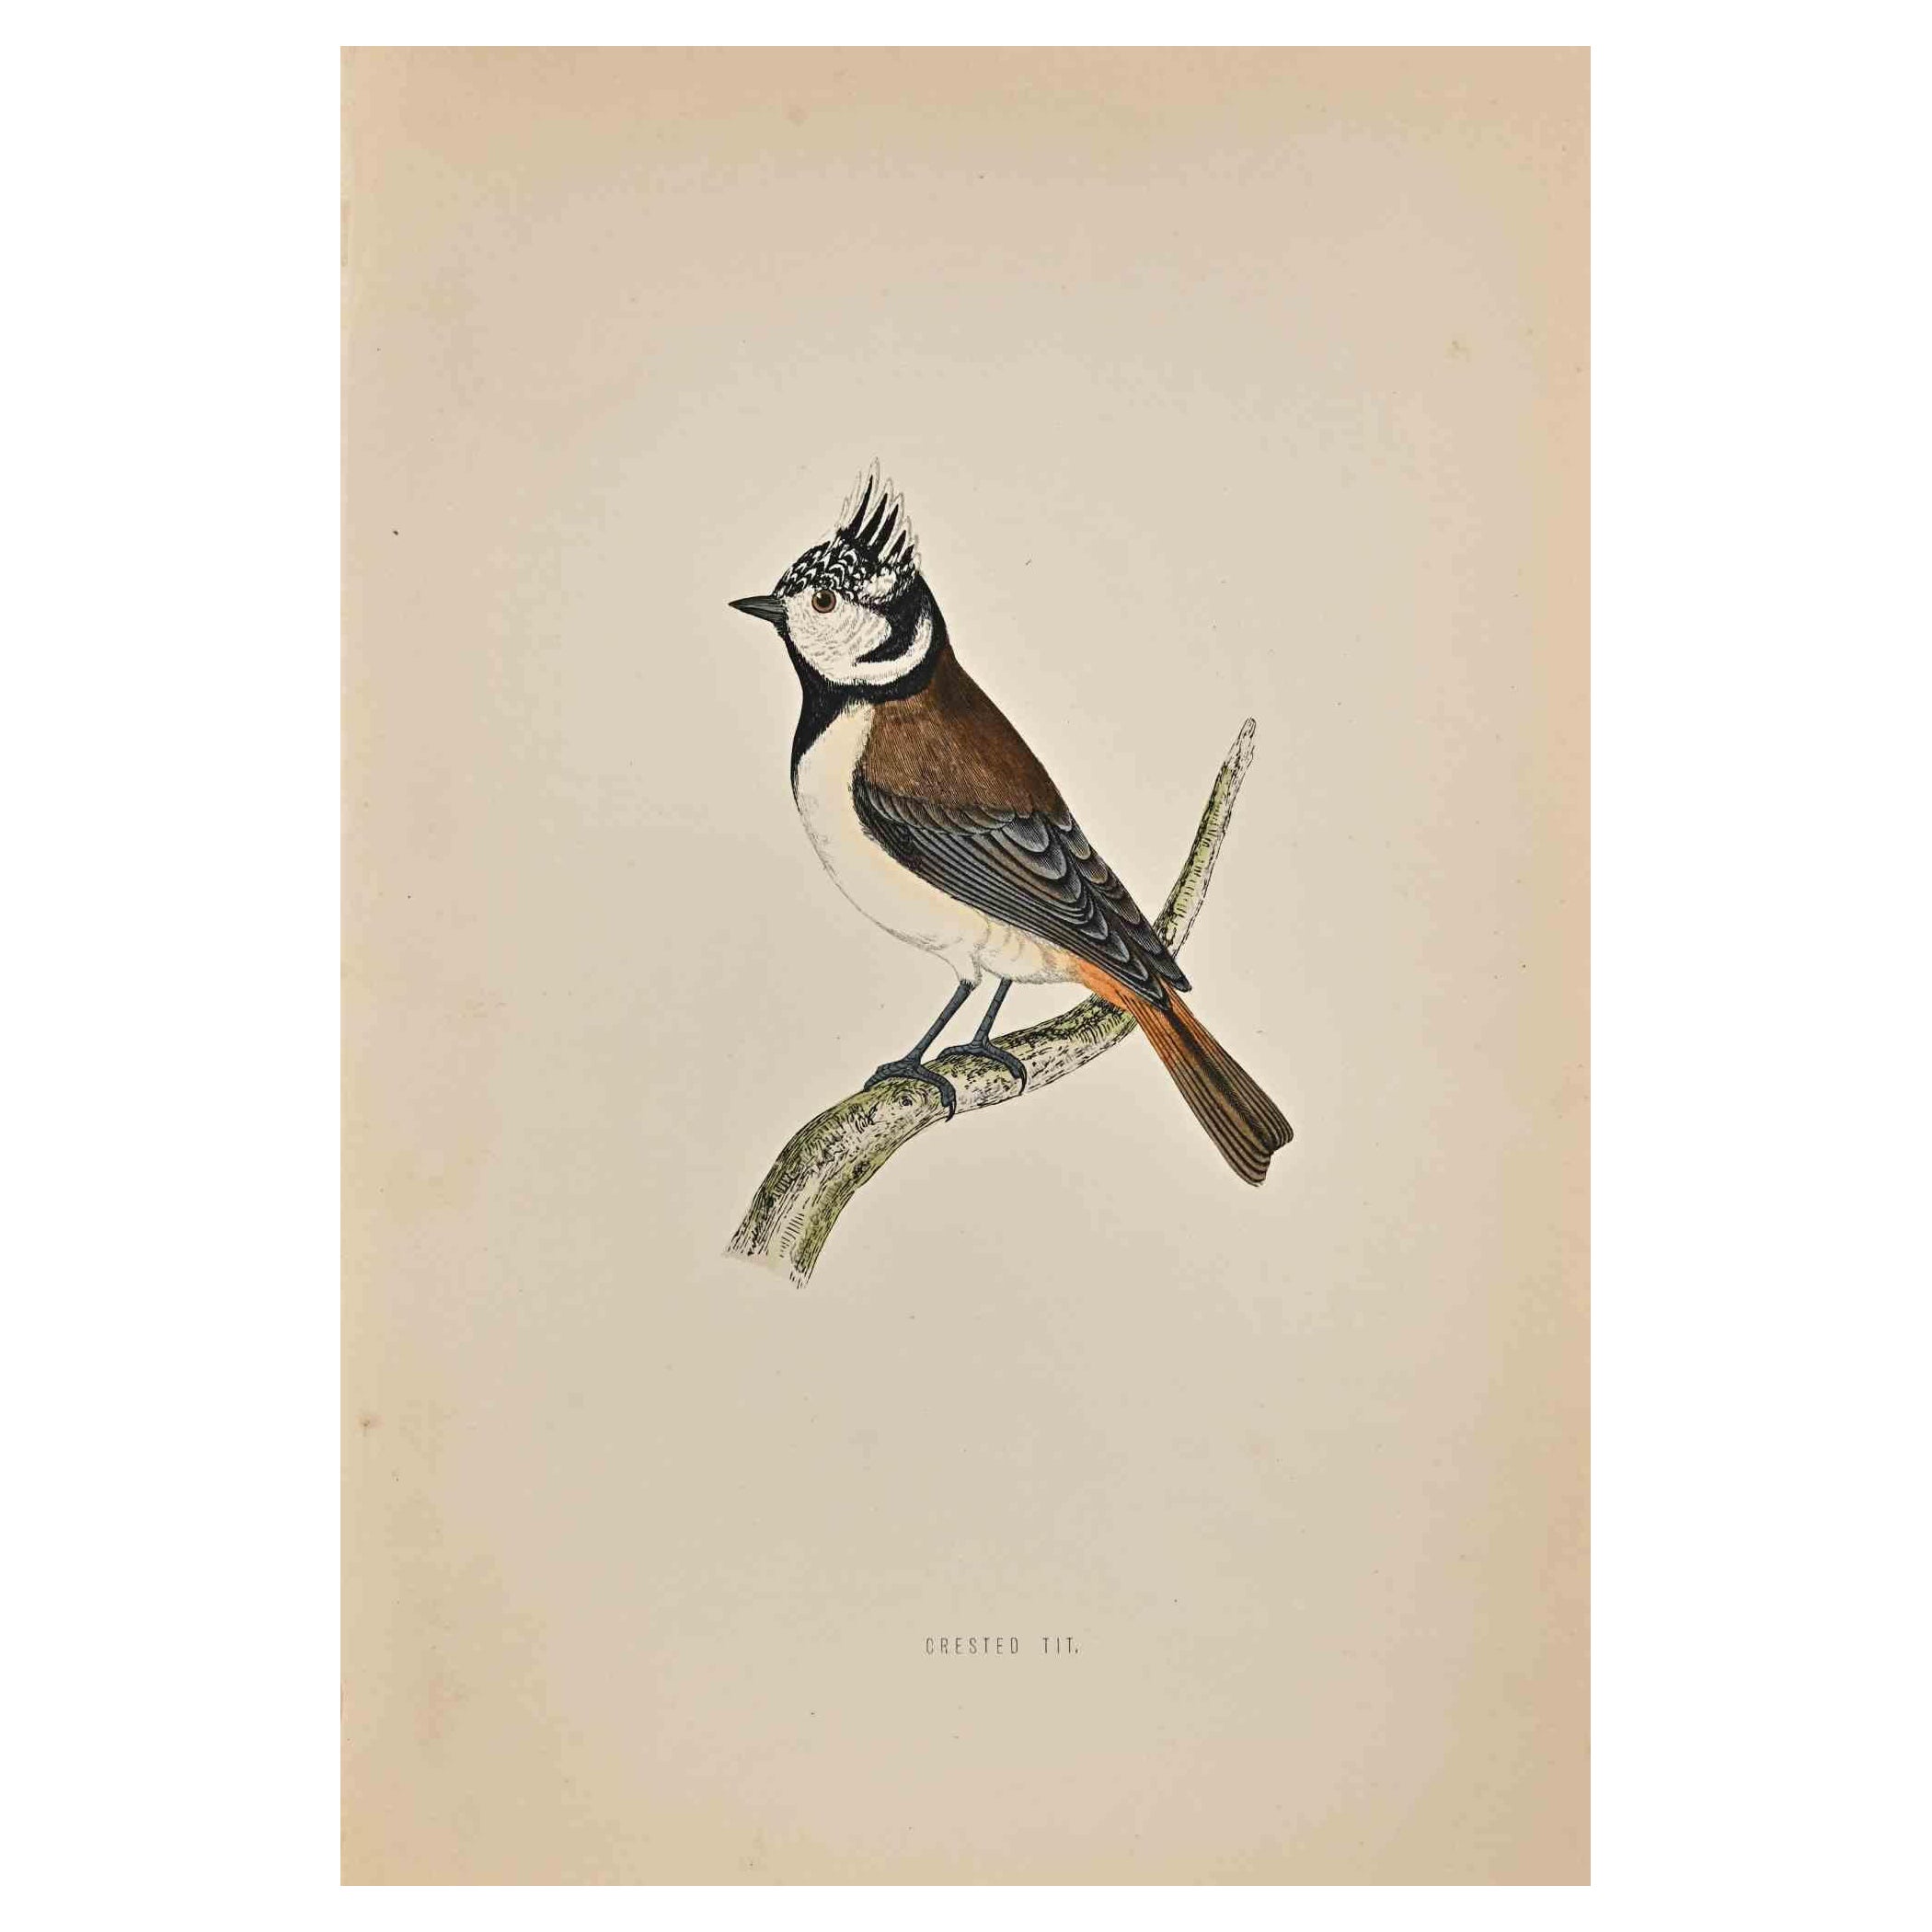 Crested Tit is a modern artwork realized in 1870 by the British artist Alexander Francis Lydon (1836-1917) . 

Woodcut print, hand colored, published by London, Bell & Sons, 1870.  Name of the bird printed in plate. This work is part of a print